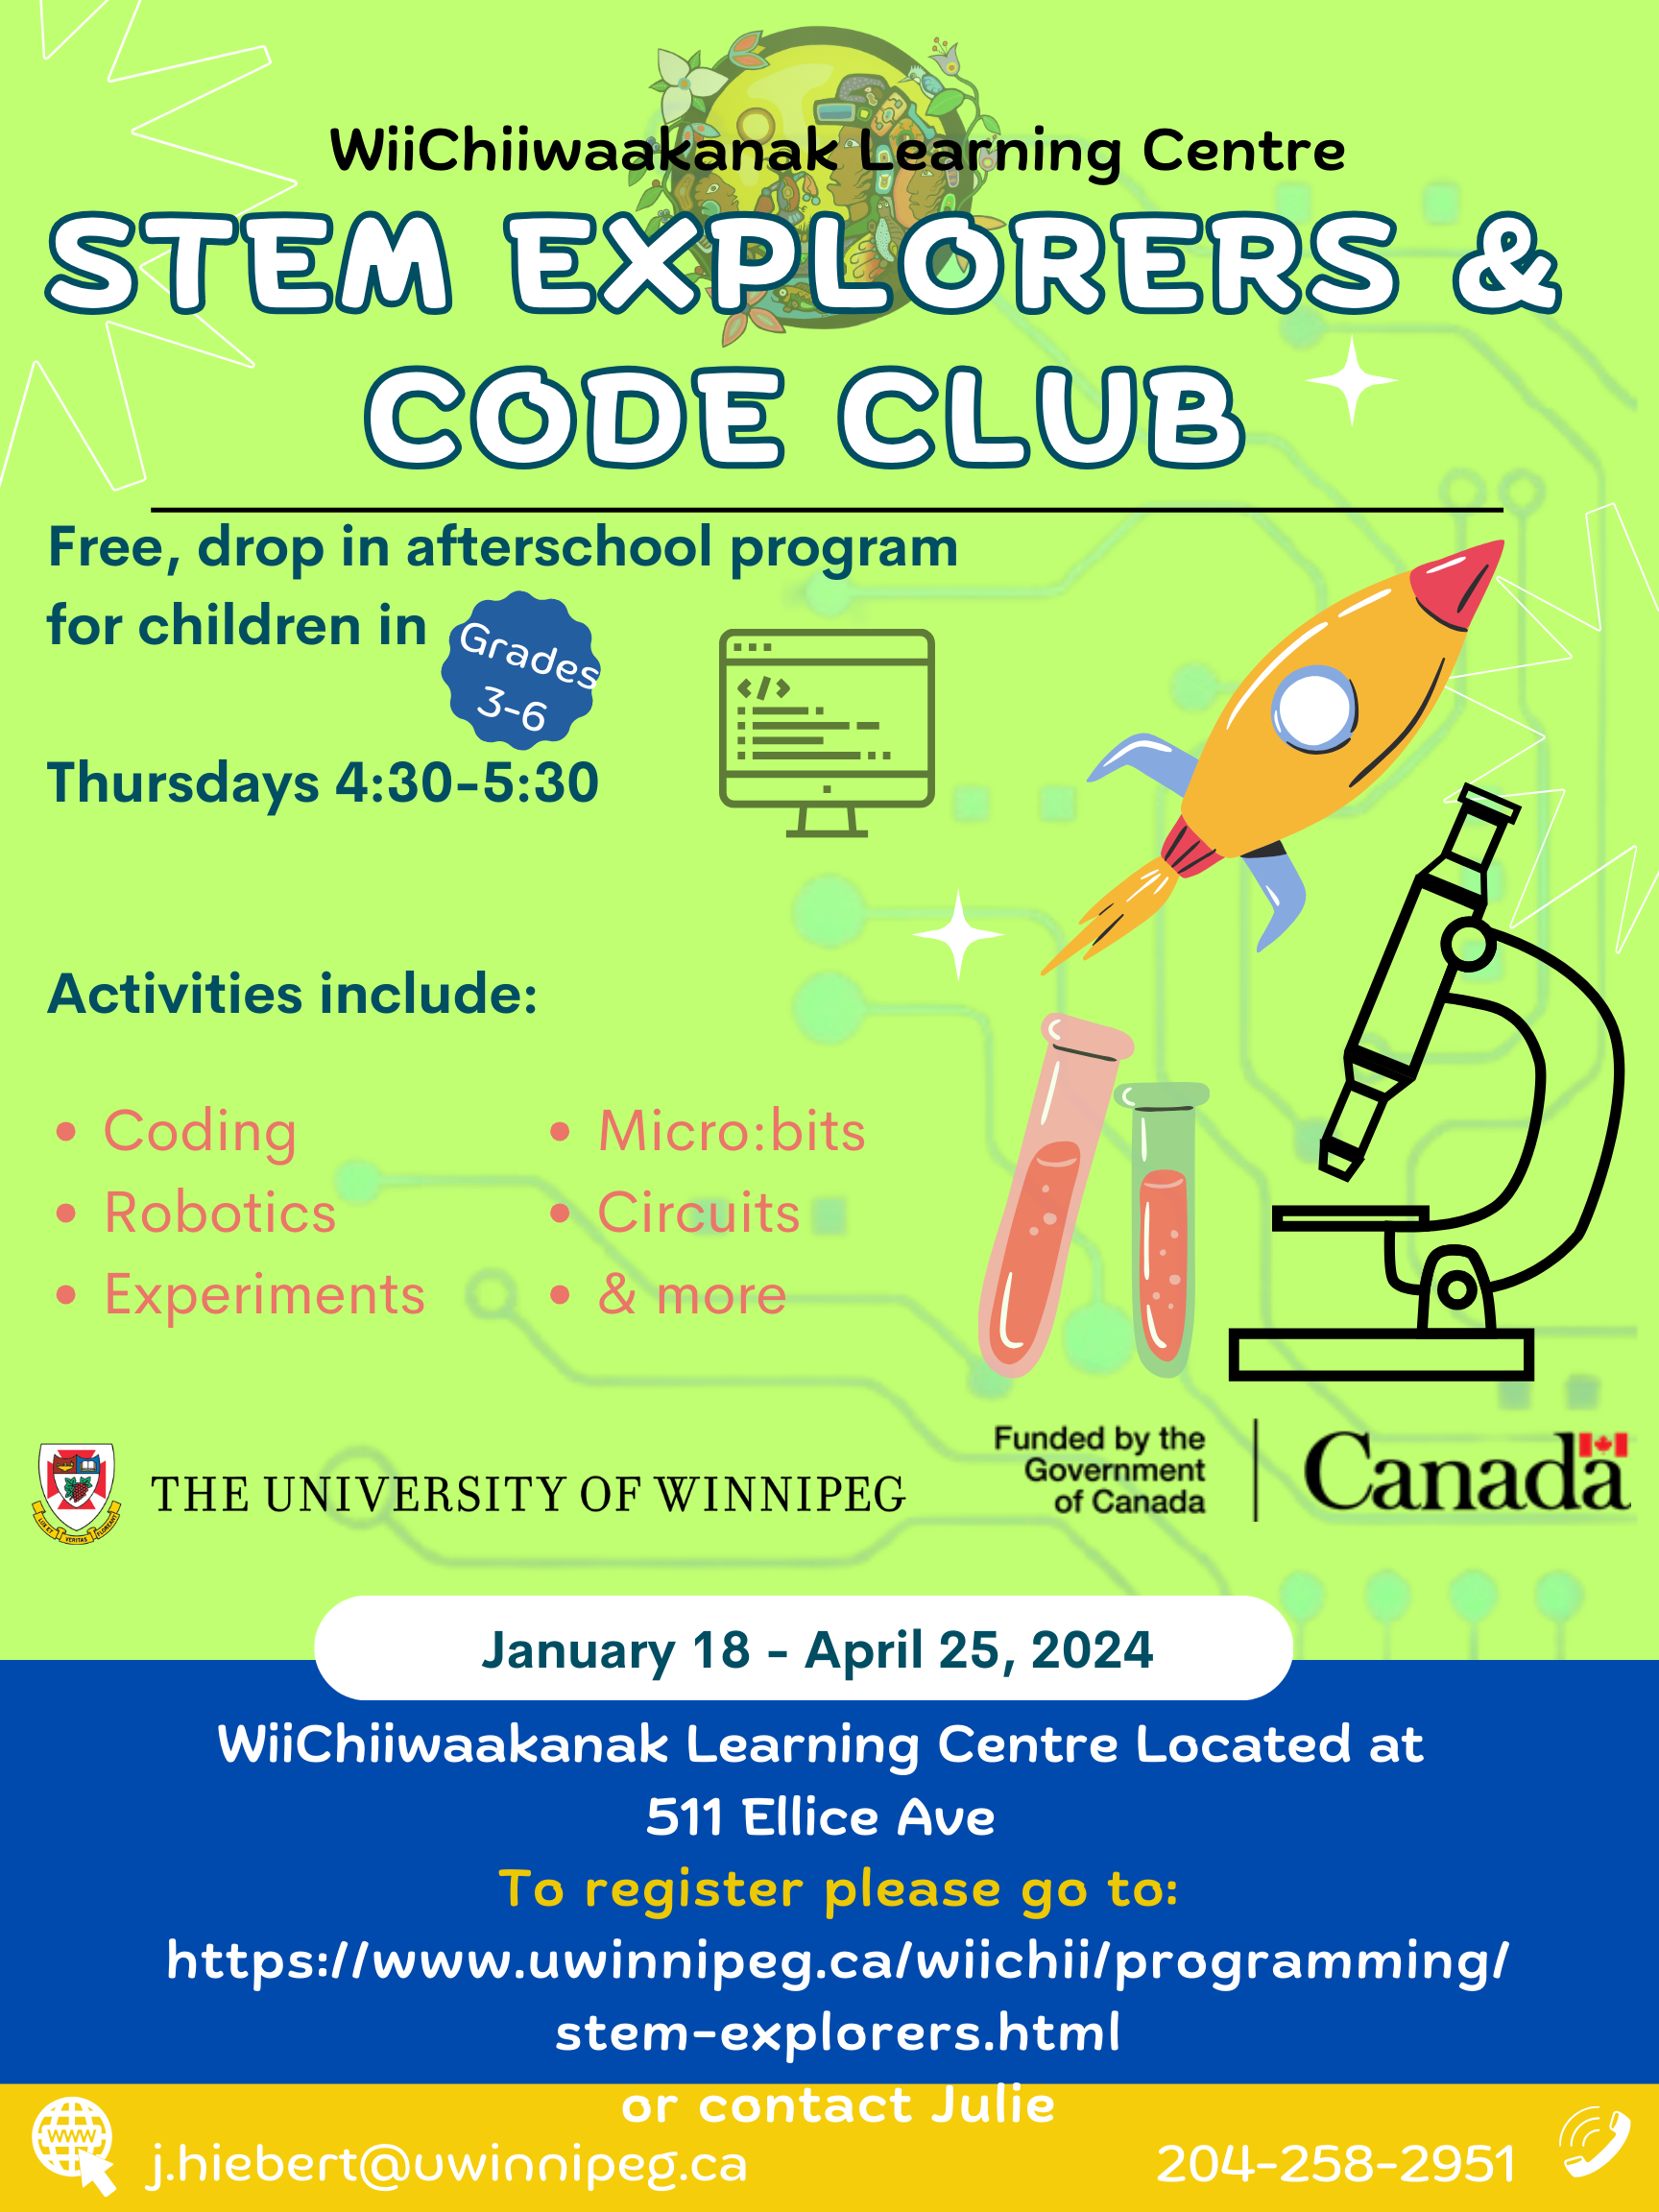 Image shows a program poster for STEM Explorers with dates as noted above. Contact info for Julie Hiebert is also listed as j.hiebert@uwinnipeg.ca